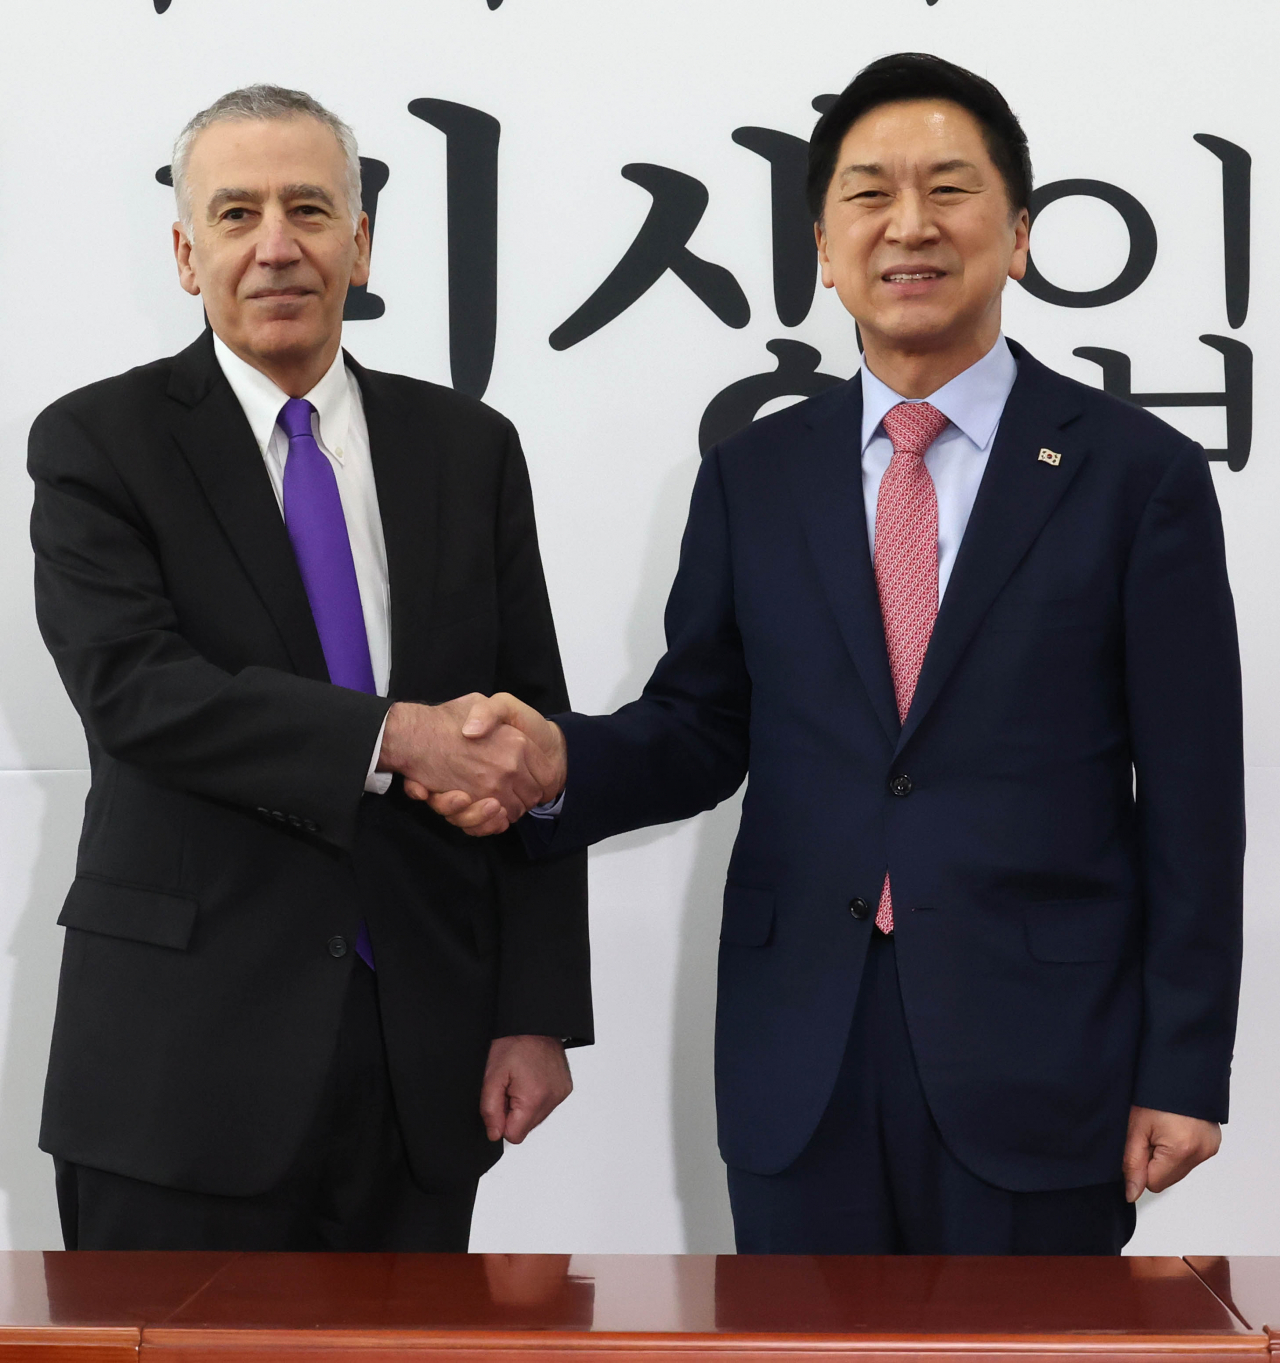 US AMB. MEETS PPP LEADER -- Philip Goldberg, US Ambassador to the Republic of Korea, and Rep. Kim Gi-hyeon, the newly elected chairperson of the South Korean ruling People Power Party, smile as they shake hands at the party conference hall at the National Assembly building in Yeouido, central Seoul, on Monday. (Yonhap)